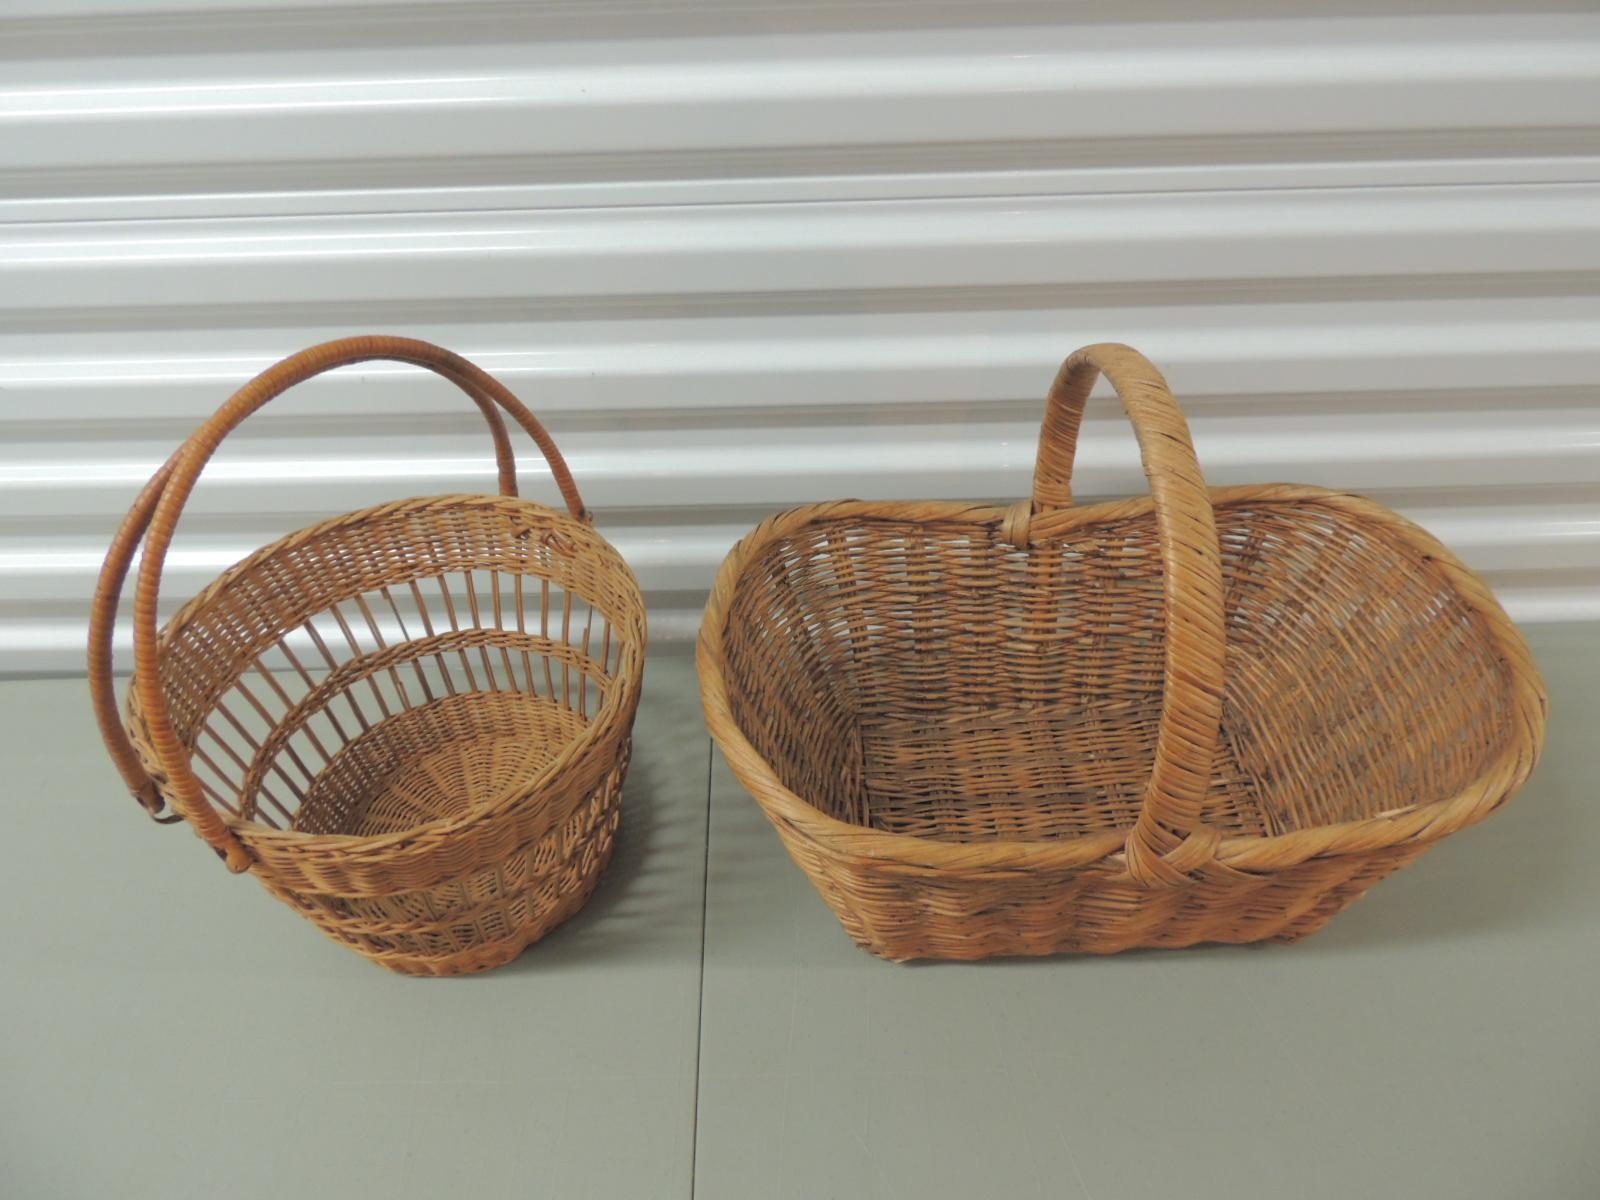 Set of '2' Woven Decorative Baskets with Handles.
Round: 11.5